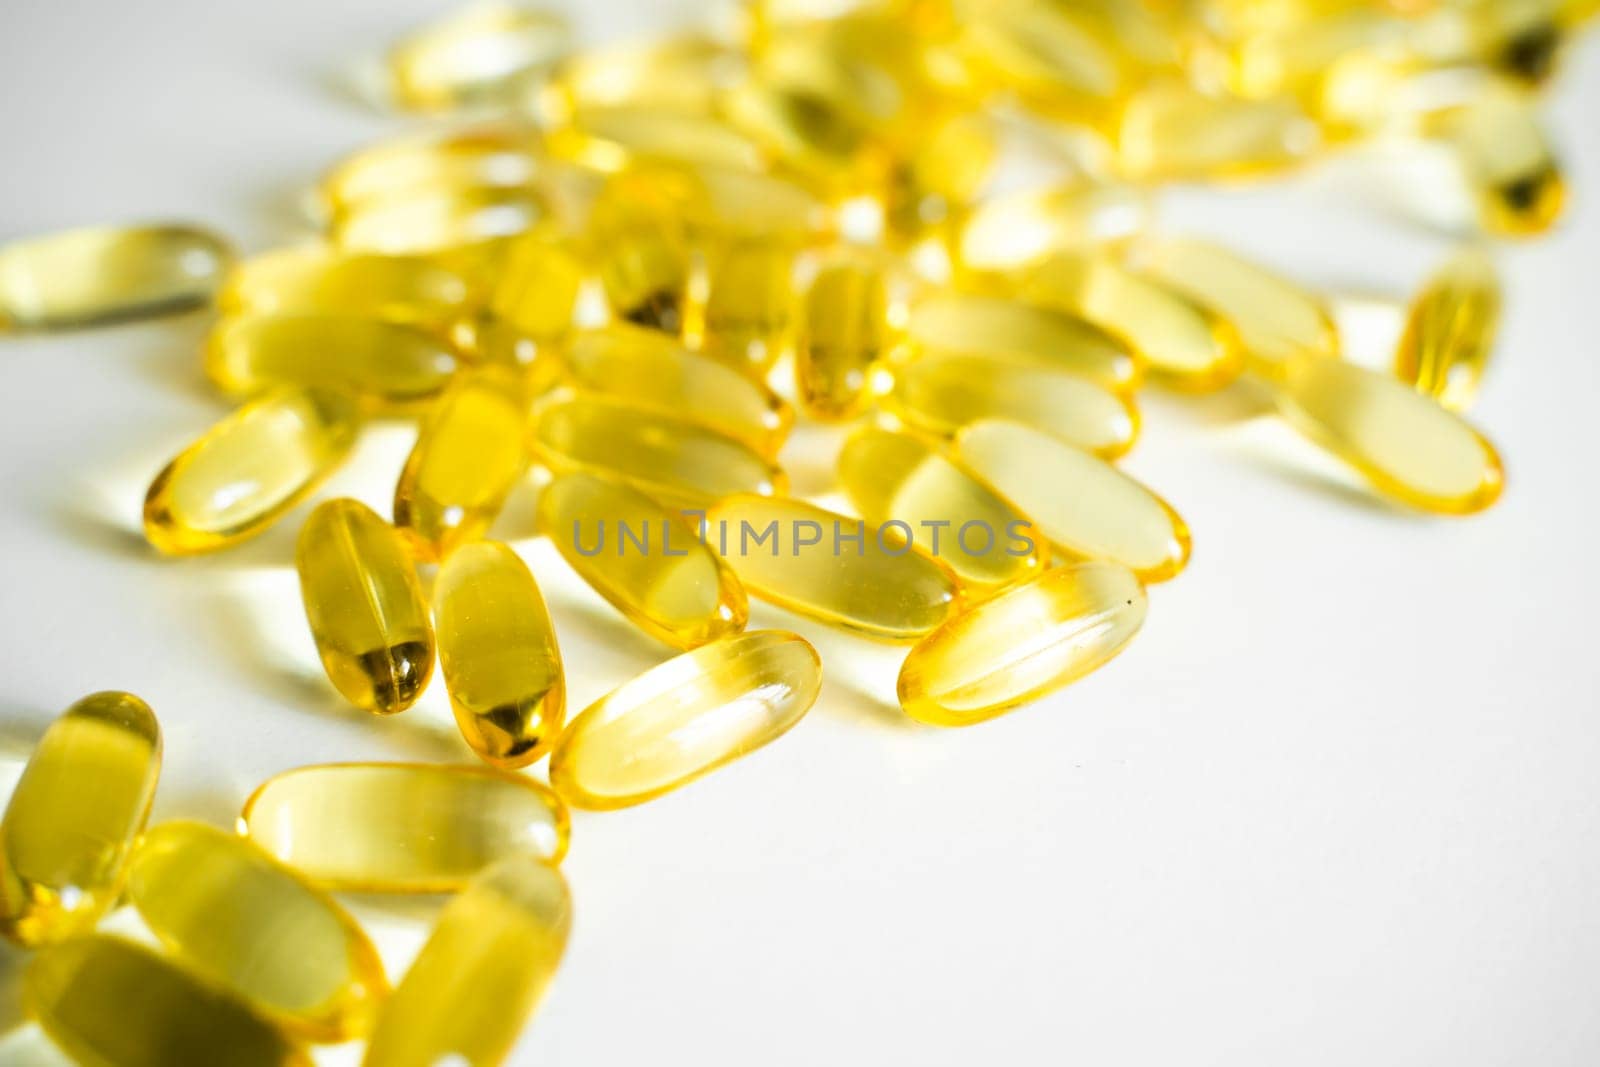 Cod liver oil omega 3 gel capsules. Fish oil capsules. Copy space for your text. Medical pill or vitamin's capsule pattern. Medicine, healthcare or pharmacy concept. by vovsht